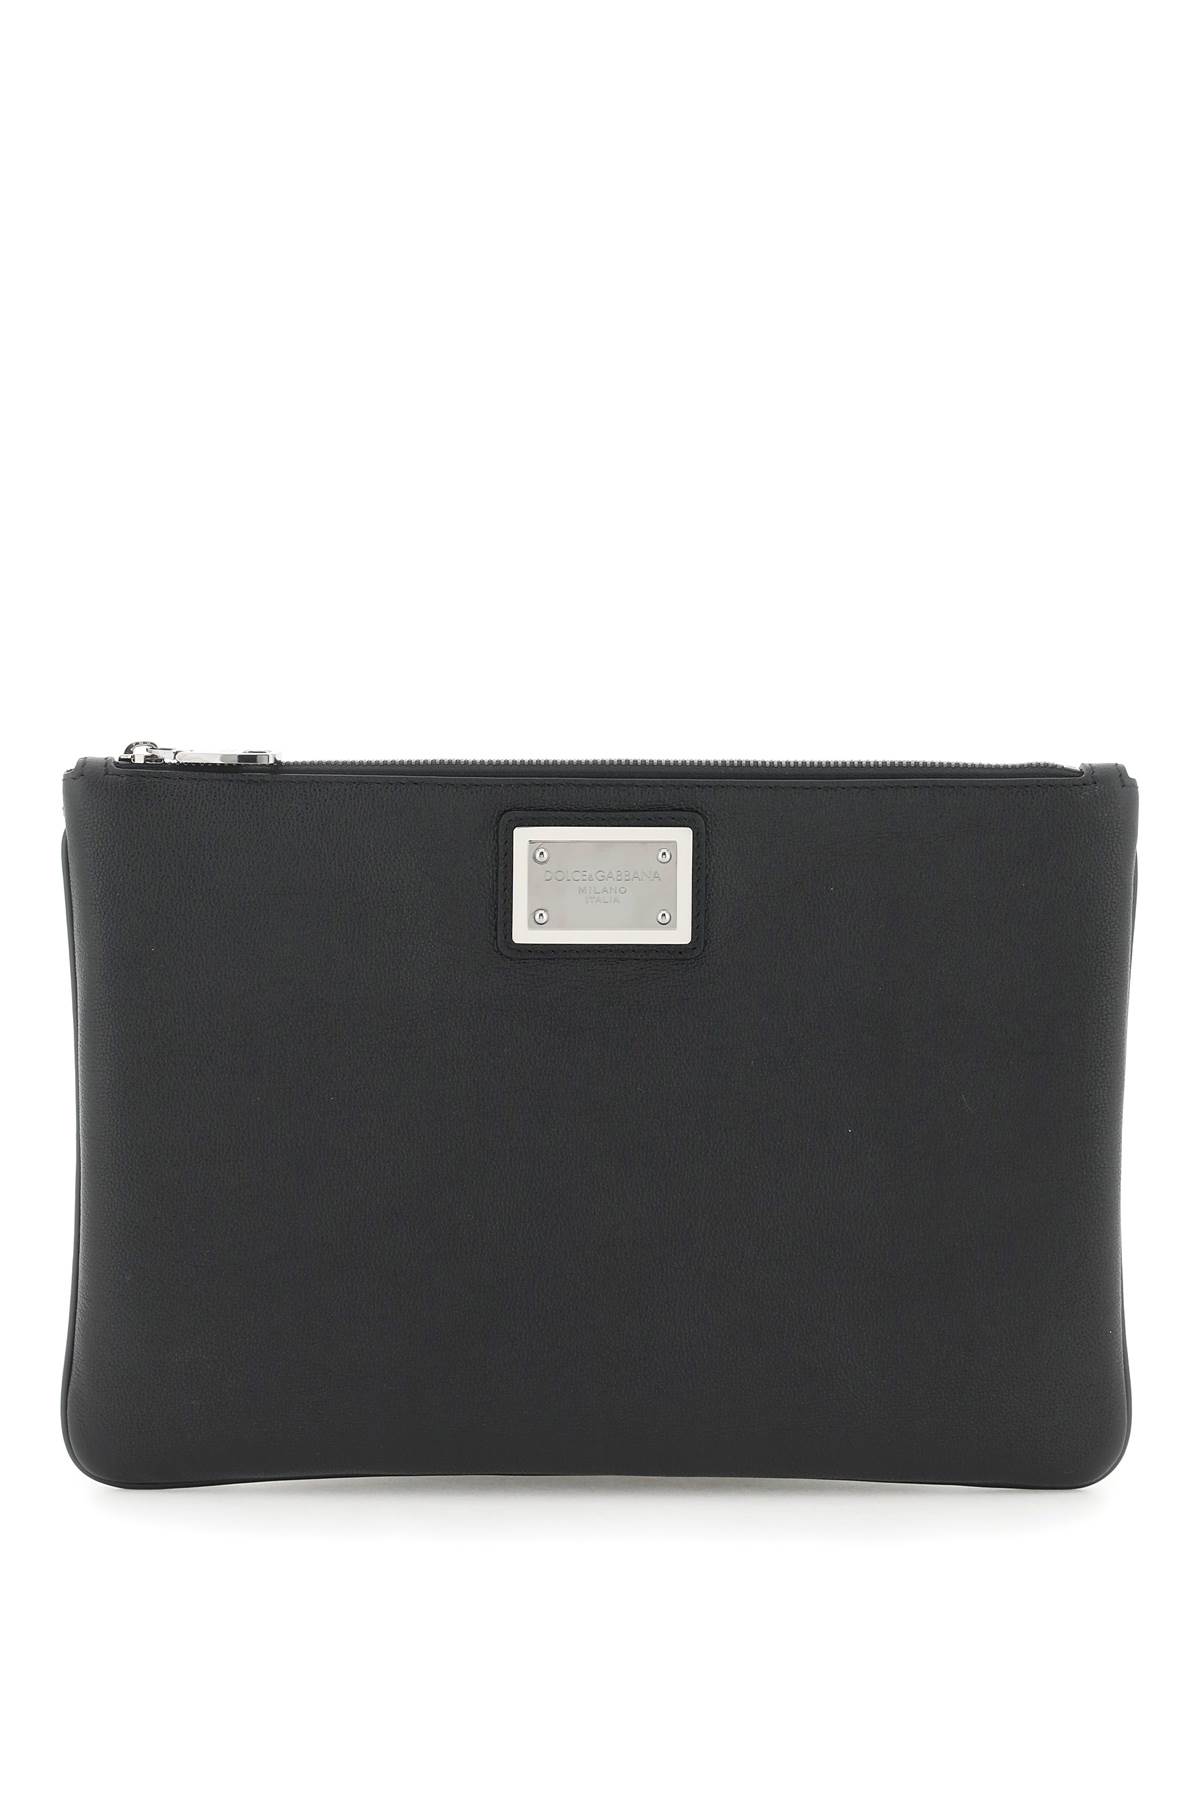 Dolce & Gabbana Logo Detail Flat Leather Pouch In Nero